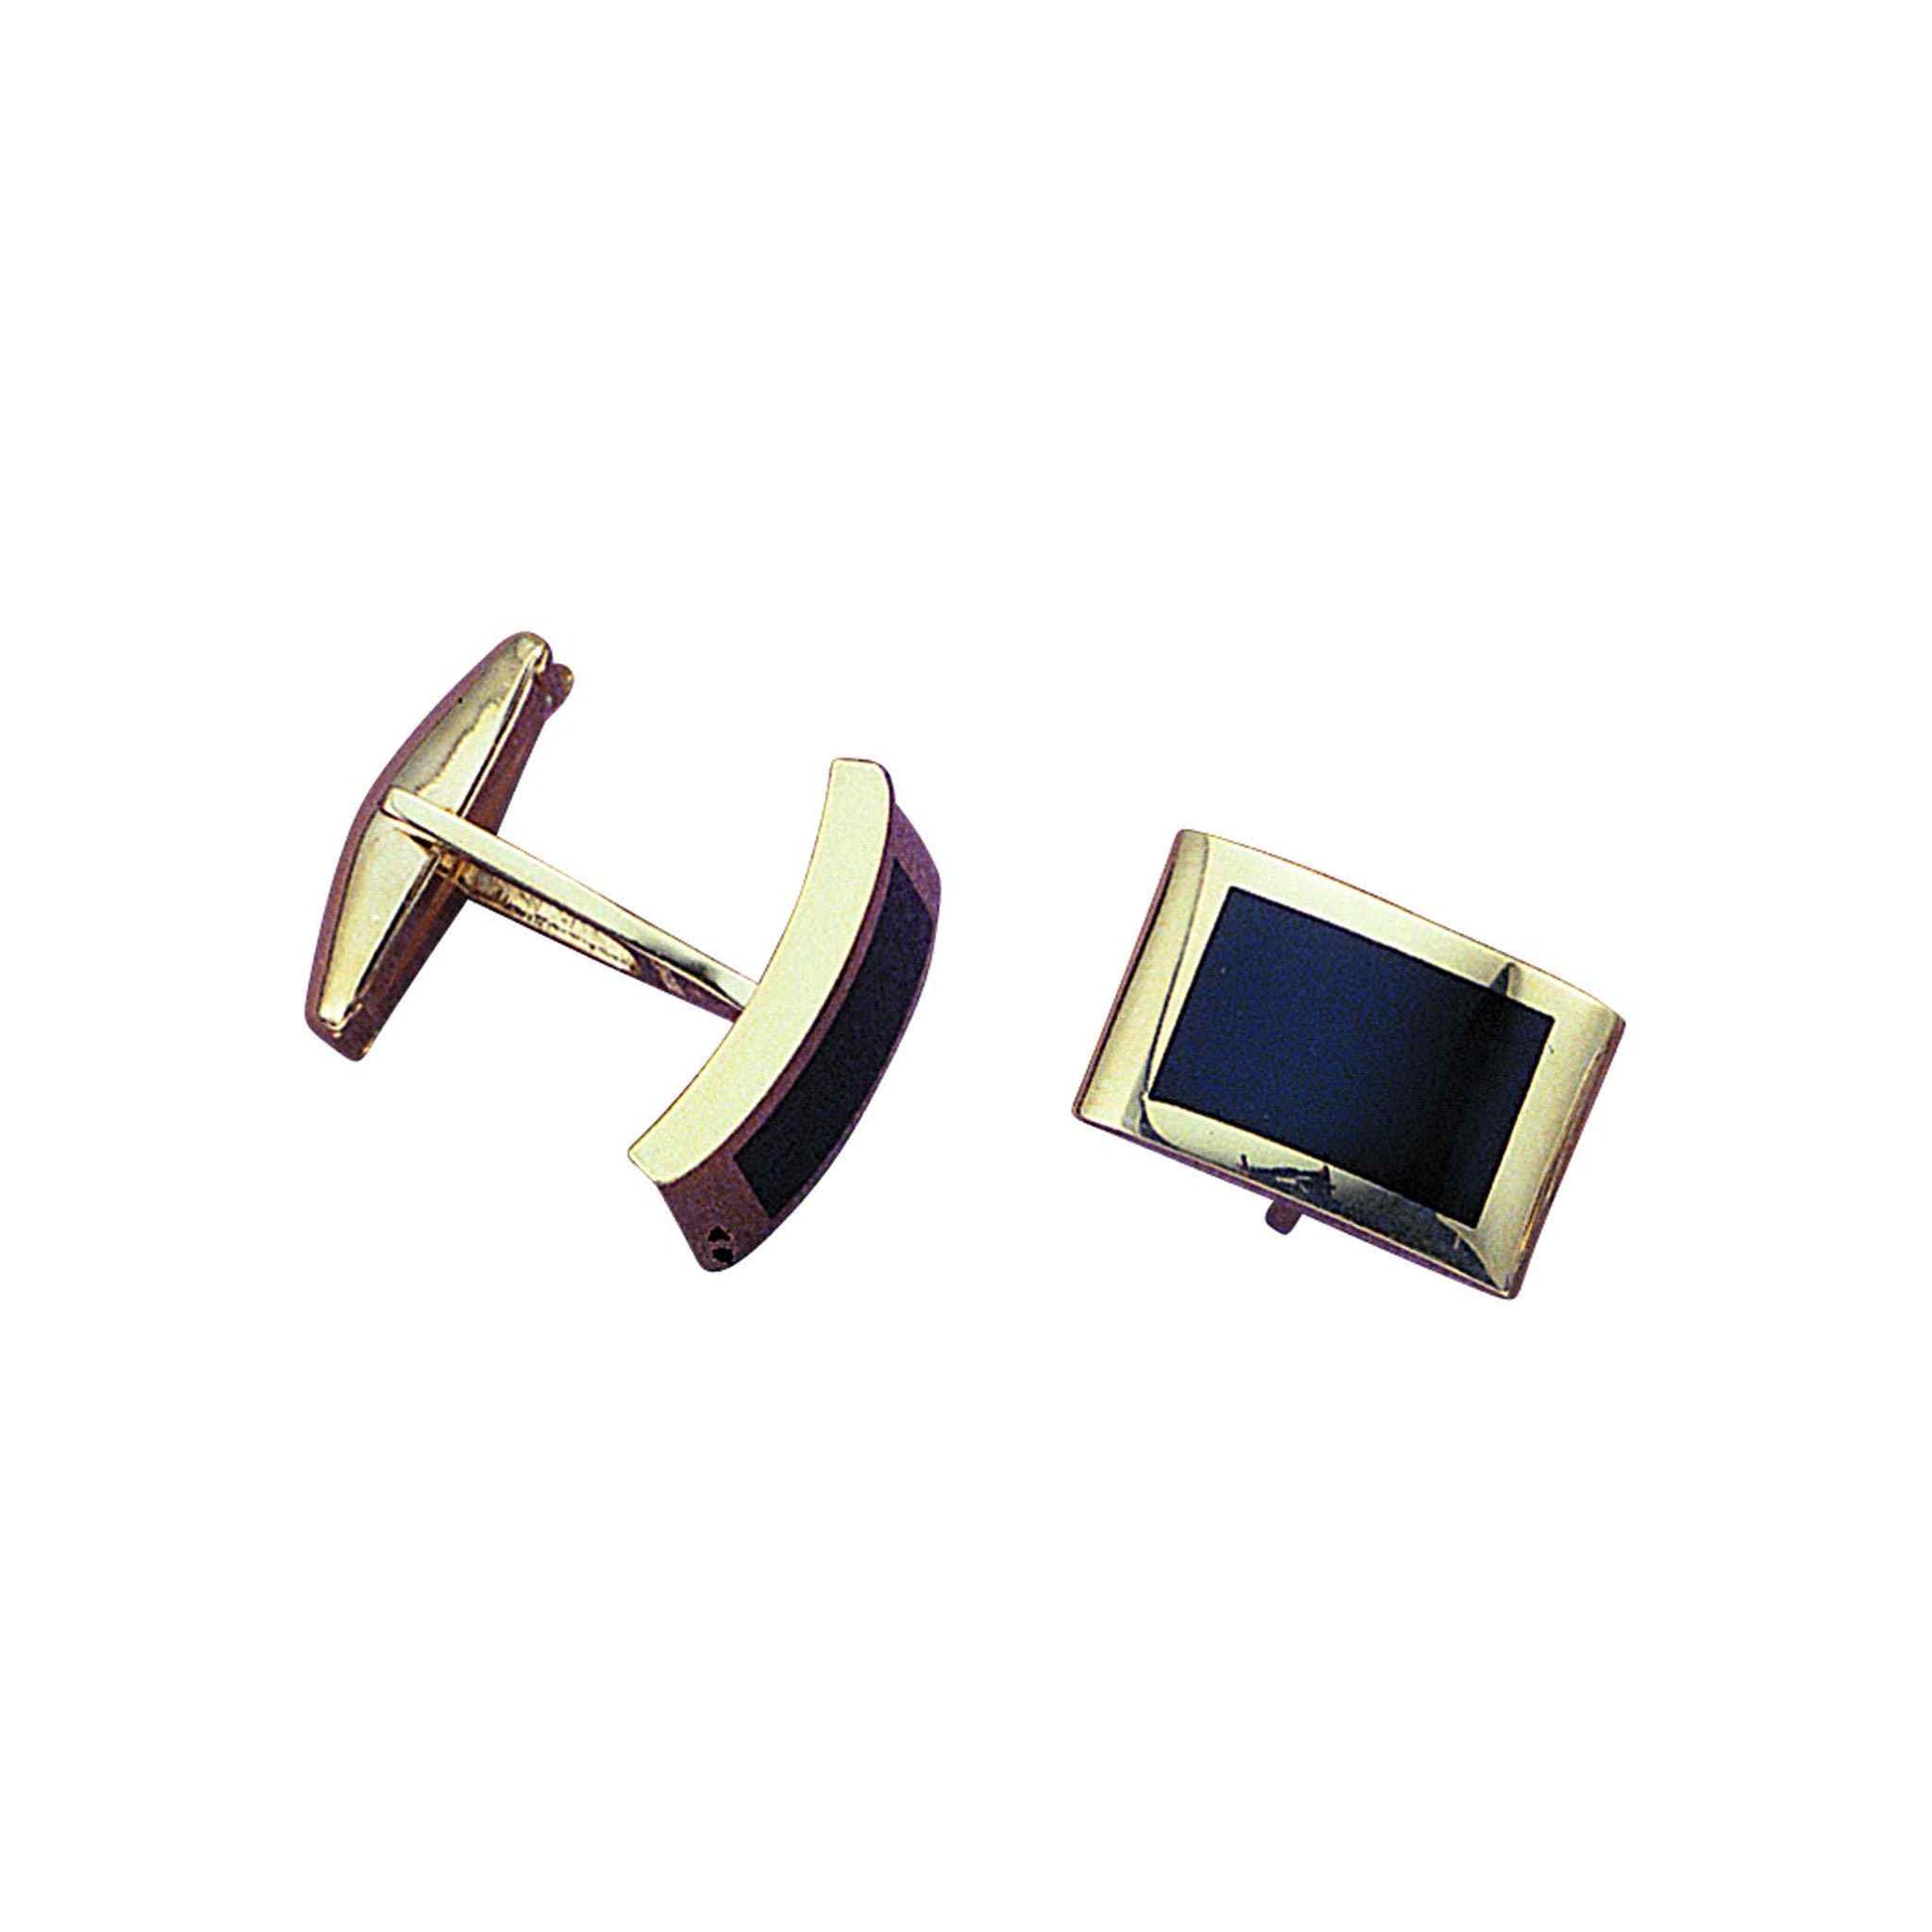 A 14k yellow gold dapped rectangle onyx cufflinks displayed on a neutral white background.